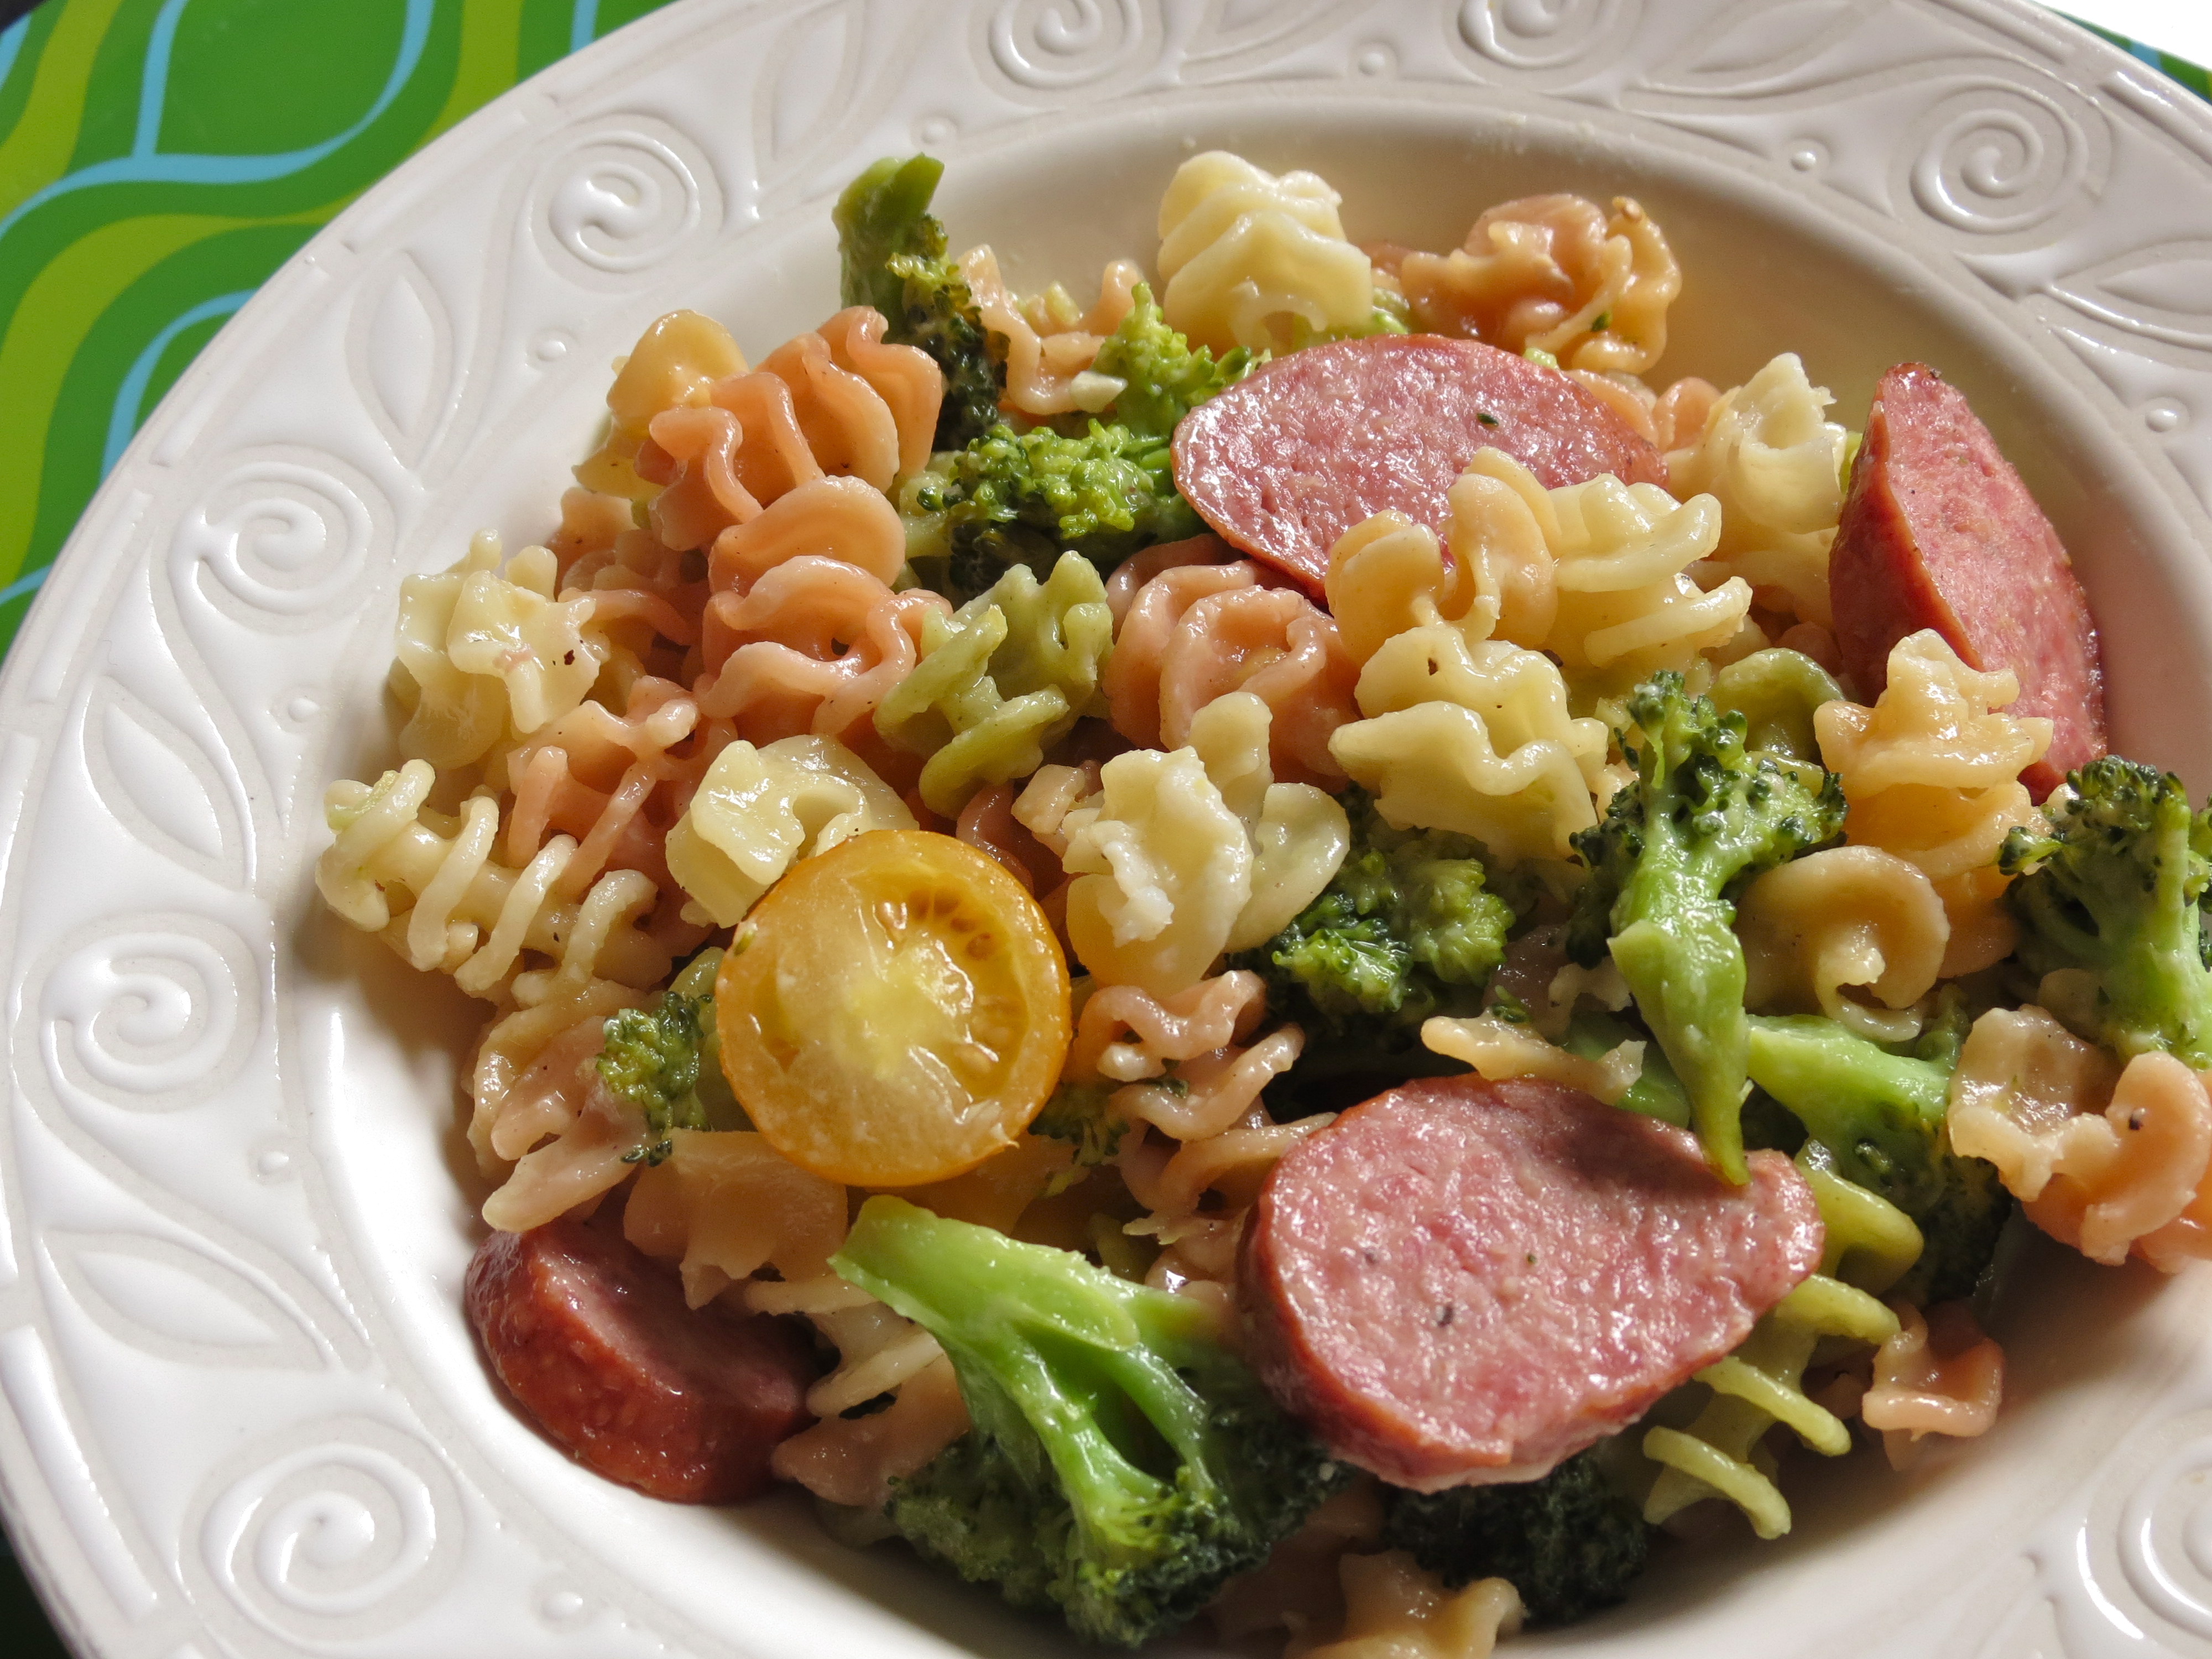 Mascarpone Pasta With Smoked Sausage And Broccoli Stephie Cooks,How To Dispose Of Cooking Oil